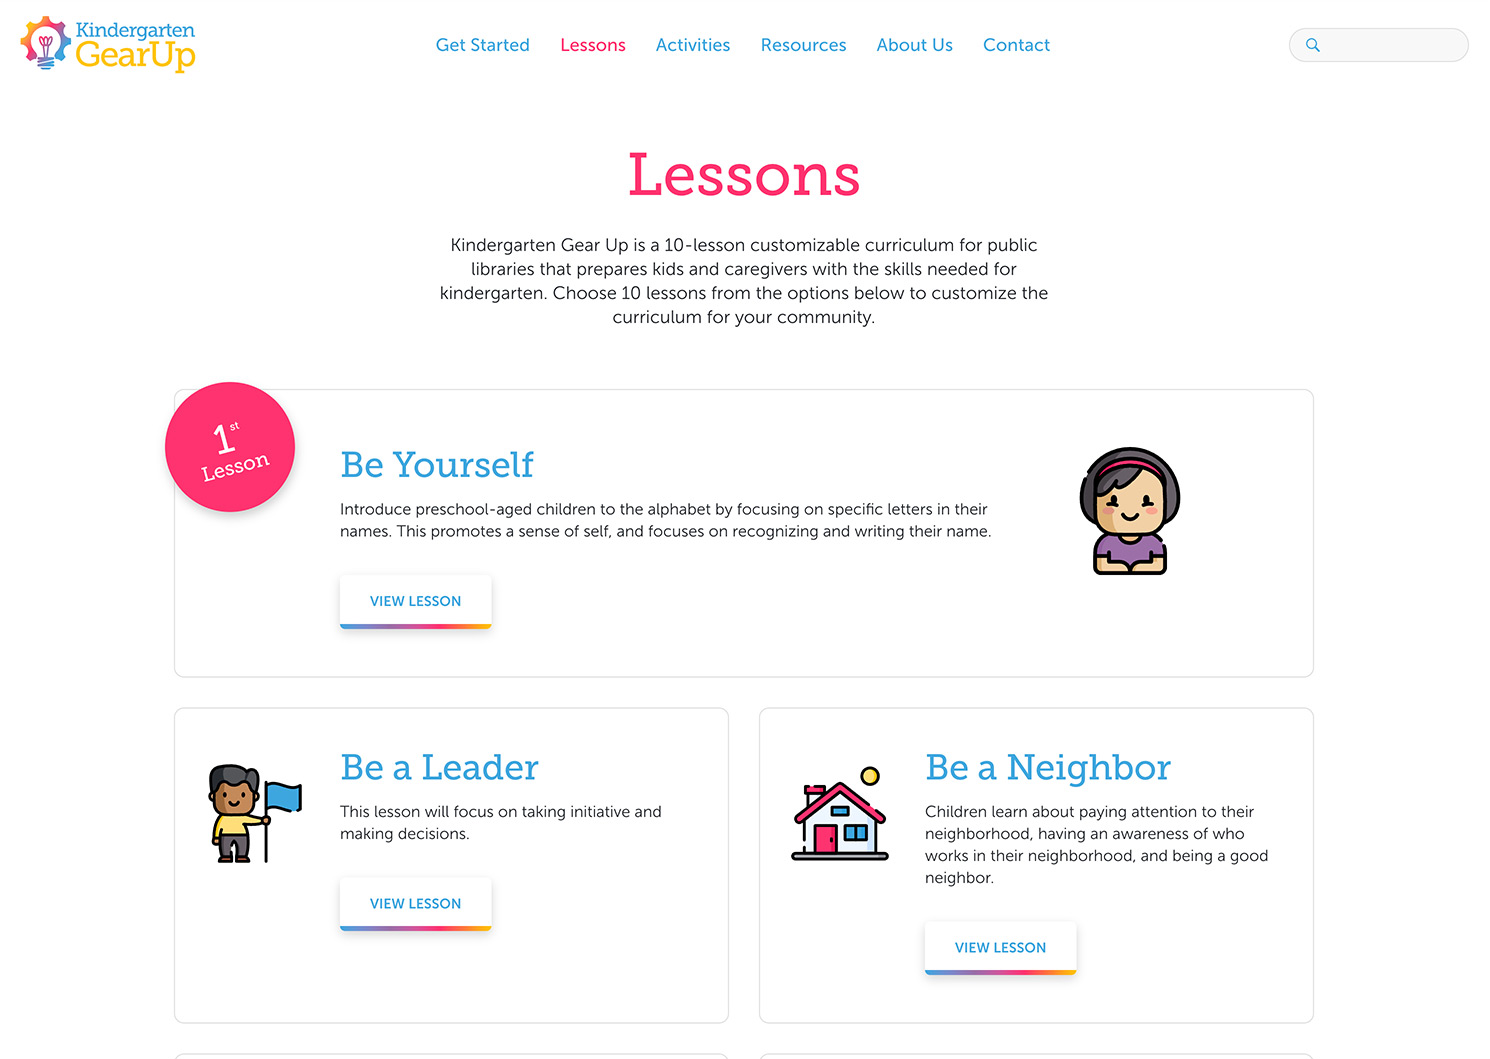 Lessons landing Page on the Kindergarten Gear Up website